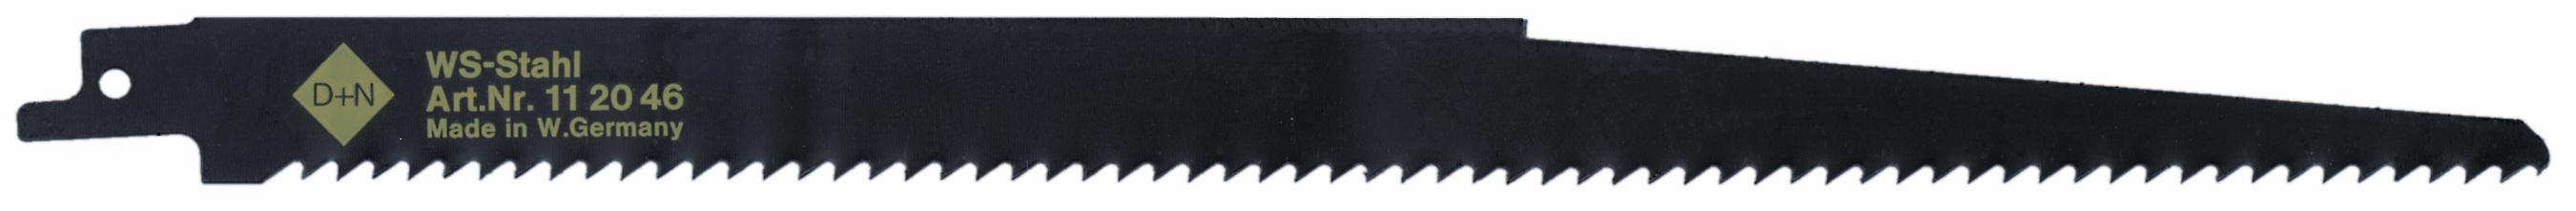 Reciprocating Saw Blade For all woods, plastic, fast coarse cutting, for curved cuts